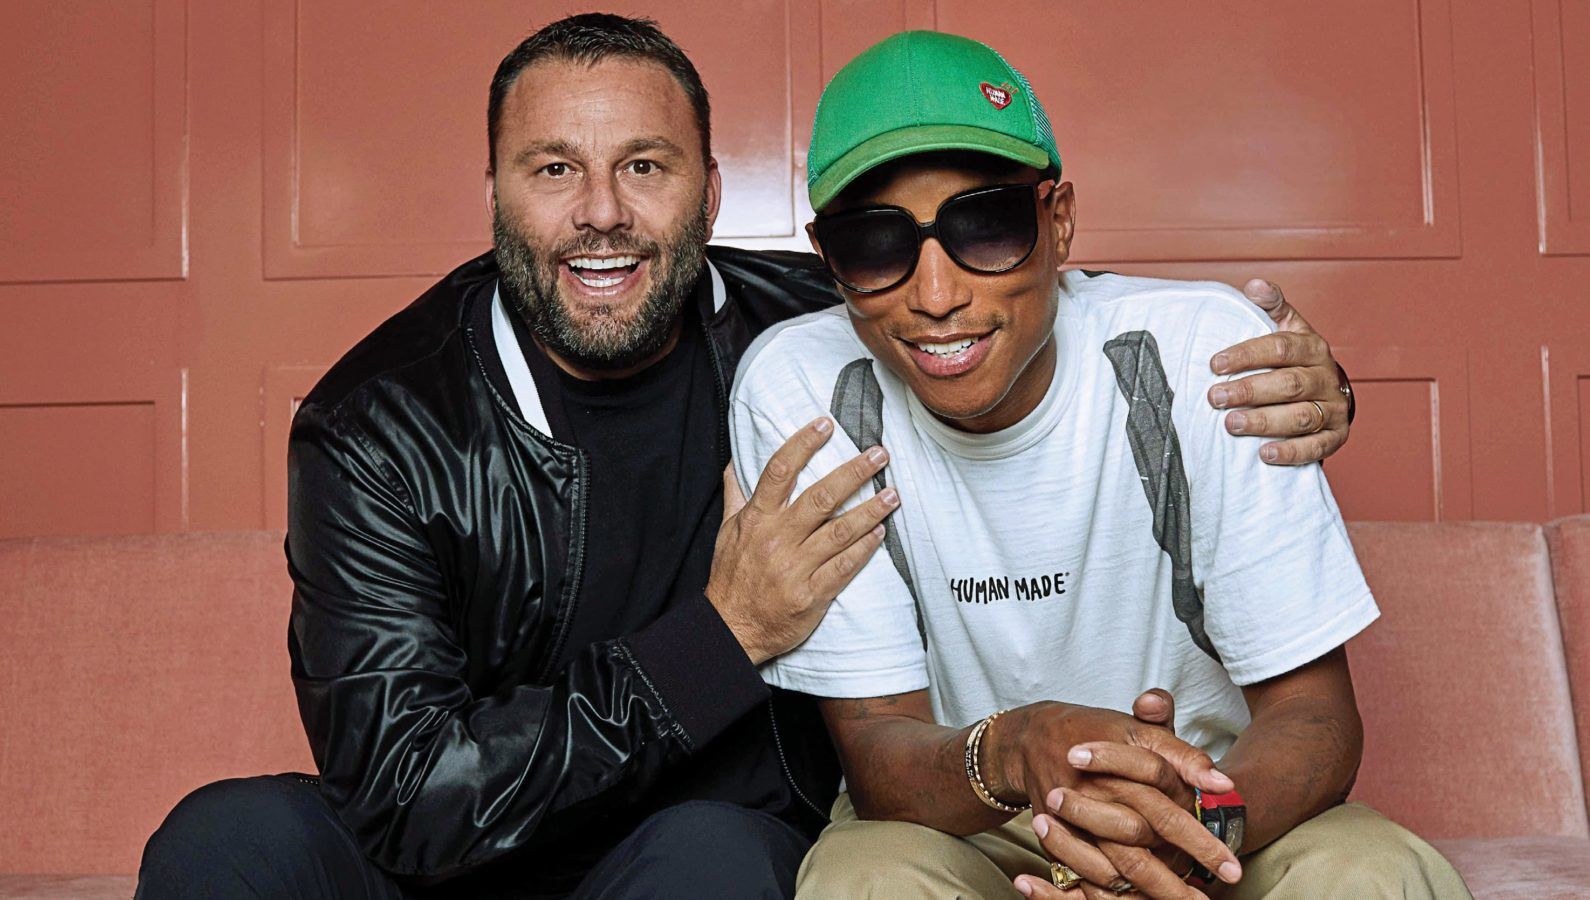 Pharrell Williams, Eminem, and other celebrities who own restaurants